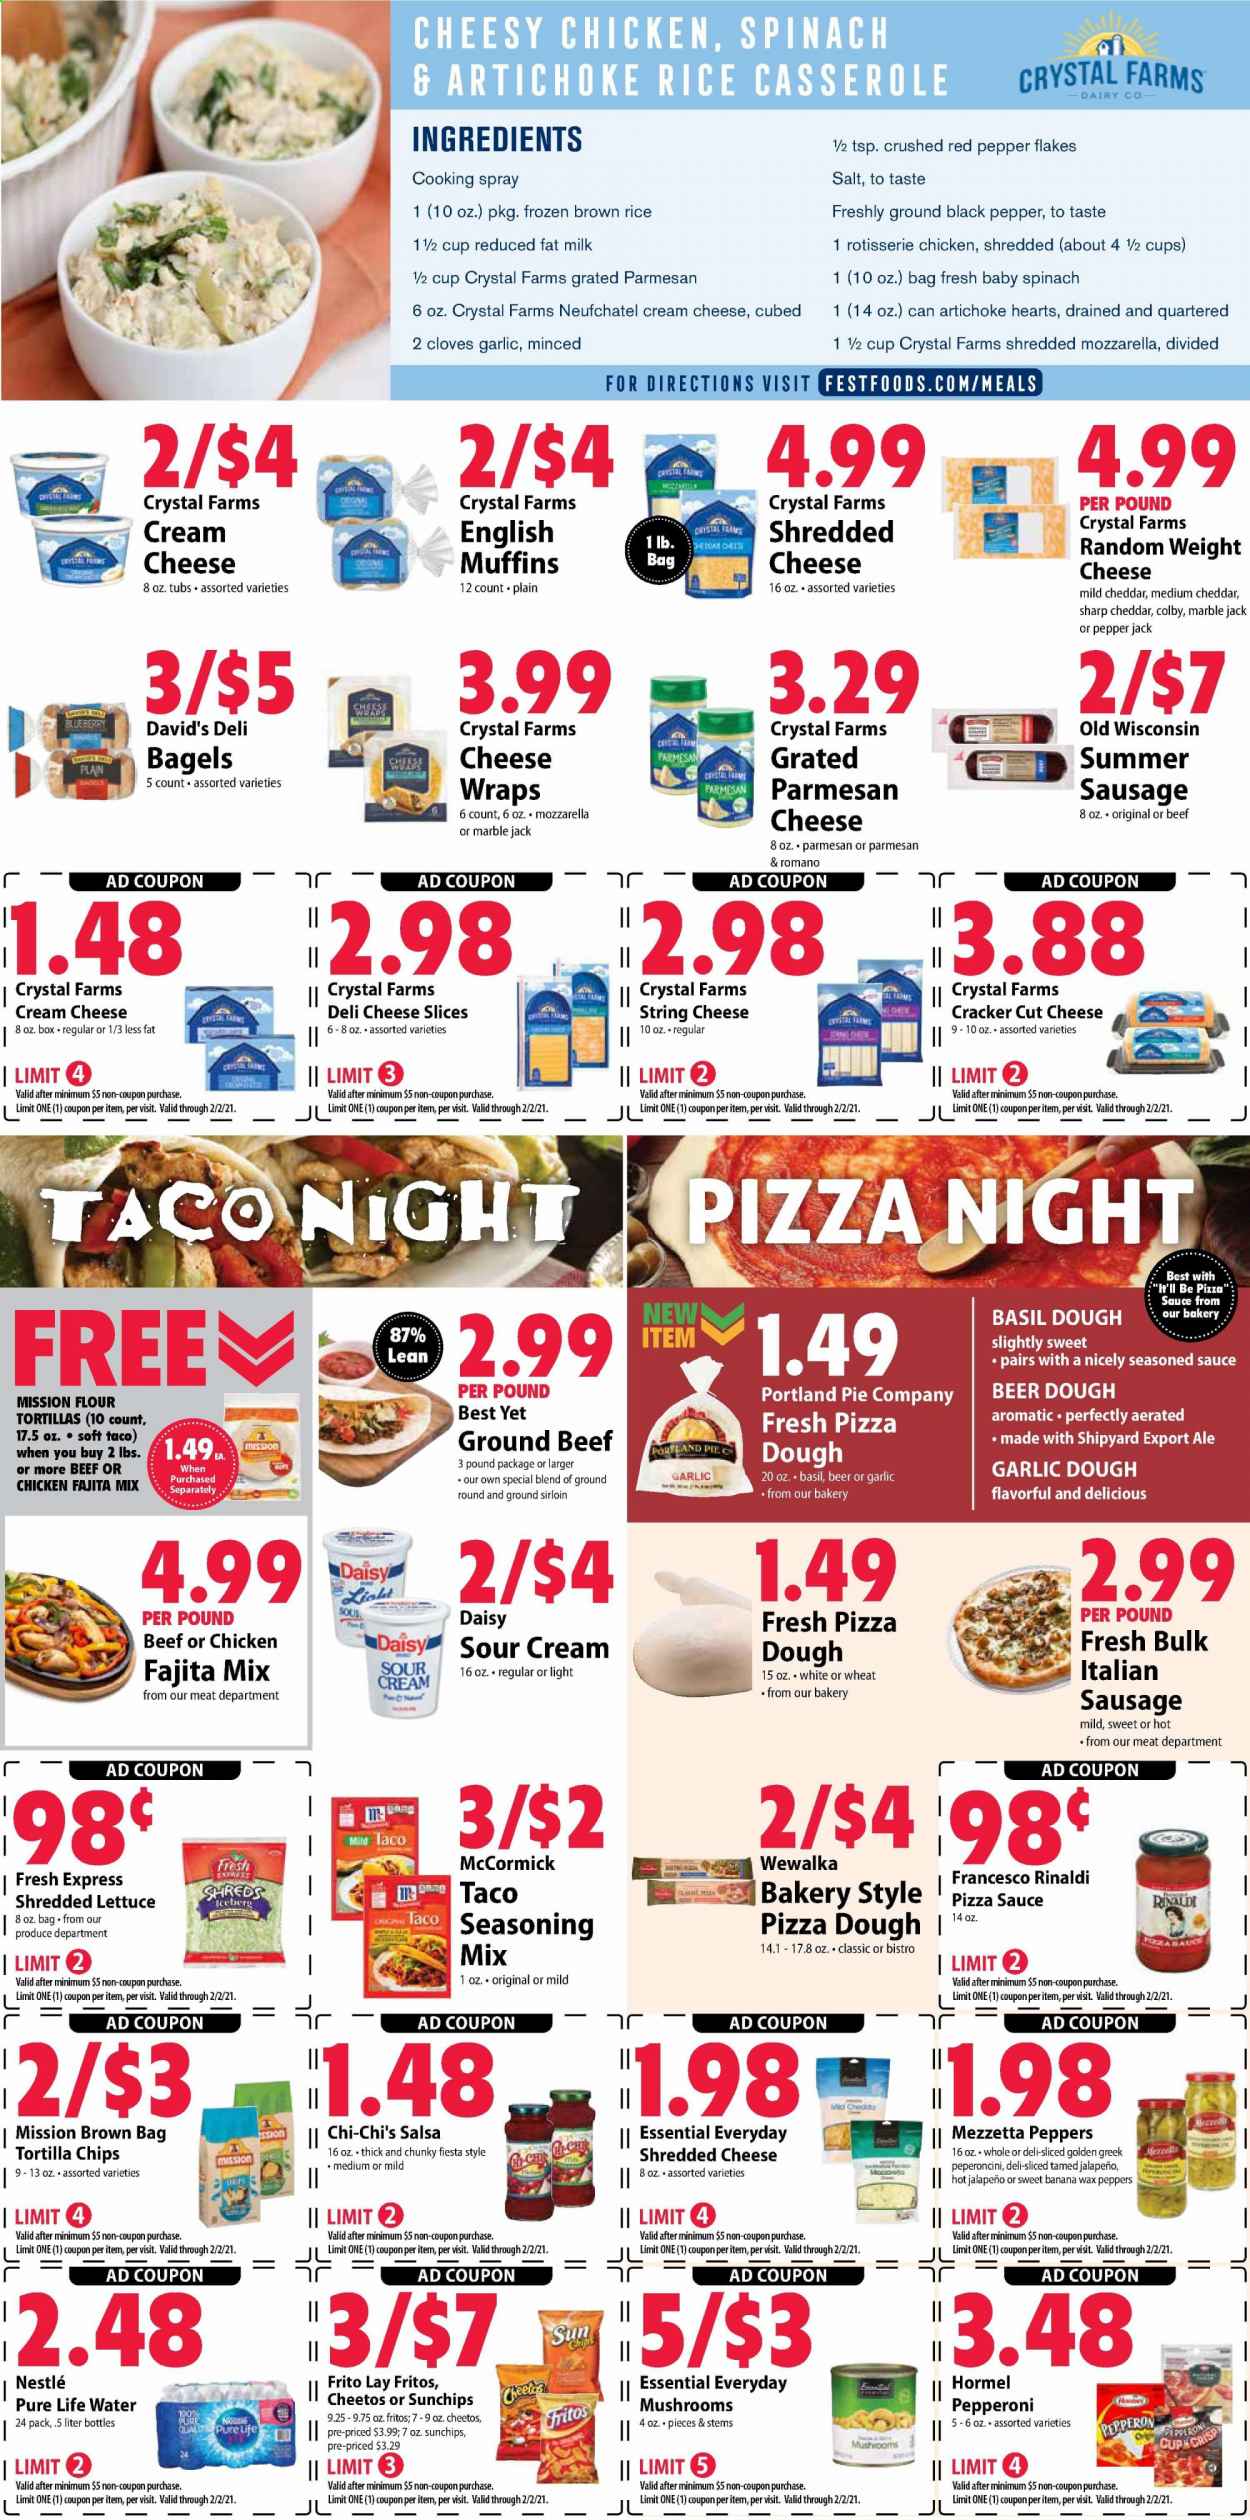 thumbnail - Festival Foods Flyer - 01/27/2021 - 02/02/2021 - Sales products - bagels, pie, muffin, cream cheese, english muffins, fajita, Hormel, sausage, pepperoni, italian sausage, Colby cheese, mild cheddar, mozzarella, Neufchâtel, shredded cheese, sliced cheese, string cheese, parmesan, Pepper Jack cheese, milk, sour cream, salsa, pizza dough, lettuce, Nestlé, crackers, tortilla chips, Cheetos, flour, salt, garlic, jalapeño, Fritos, brown rice, rice, esponja, cloves, cooking spray, Pure Life Water, beer, beef meat, ground beef. Page 4.